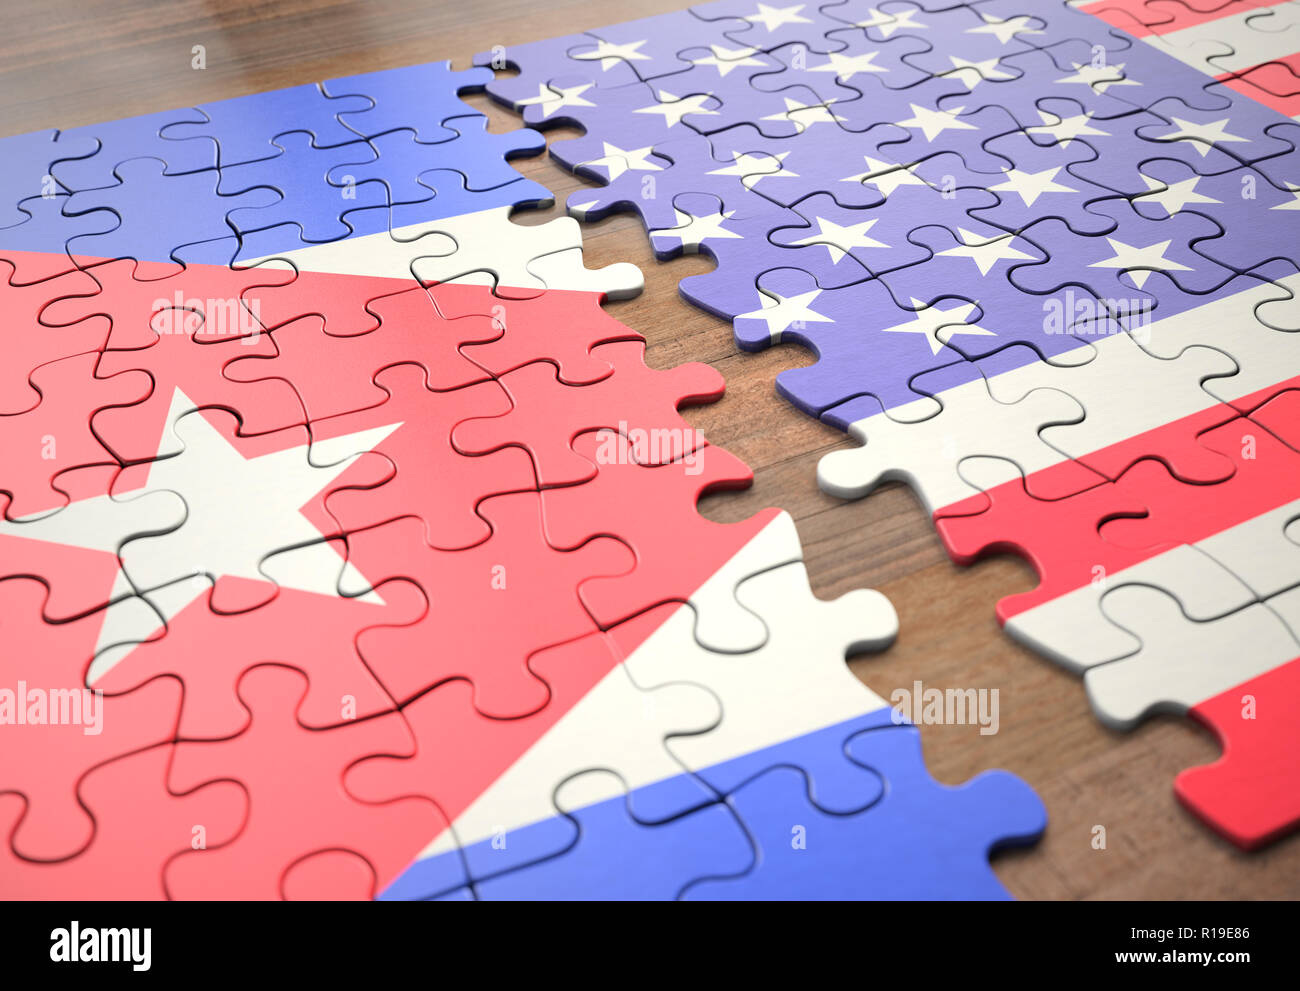 Two nations joining in a puzzle game that represents union, peace, commerce, social and human agreement. Stock Photo